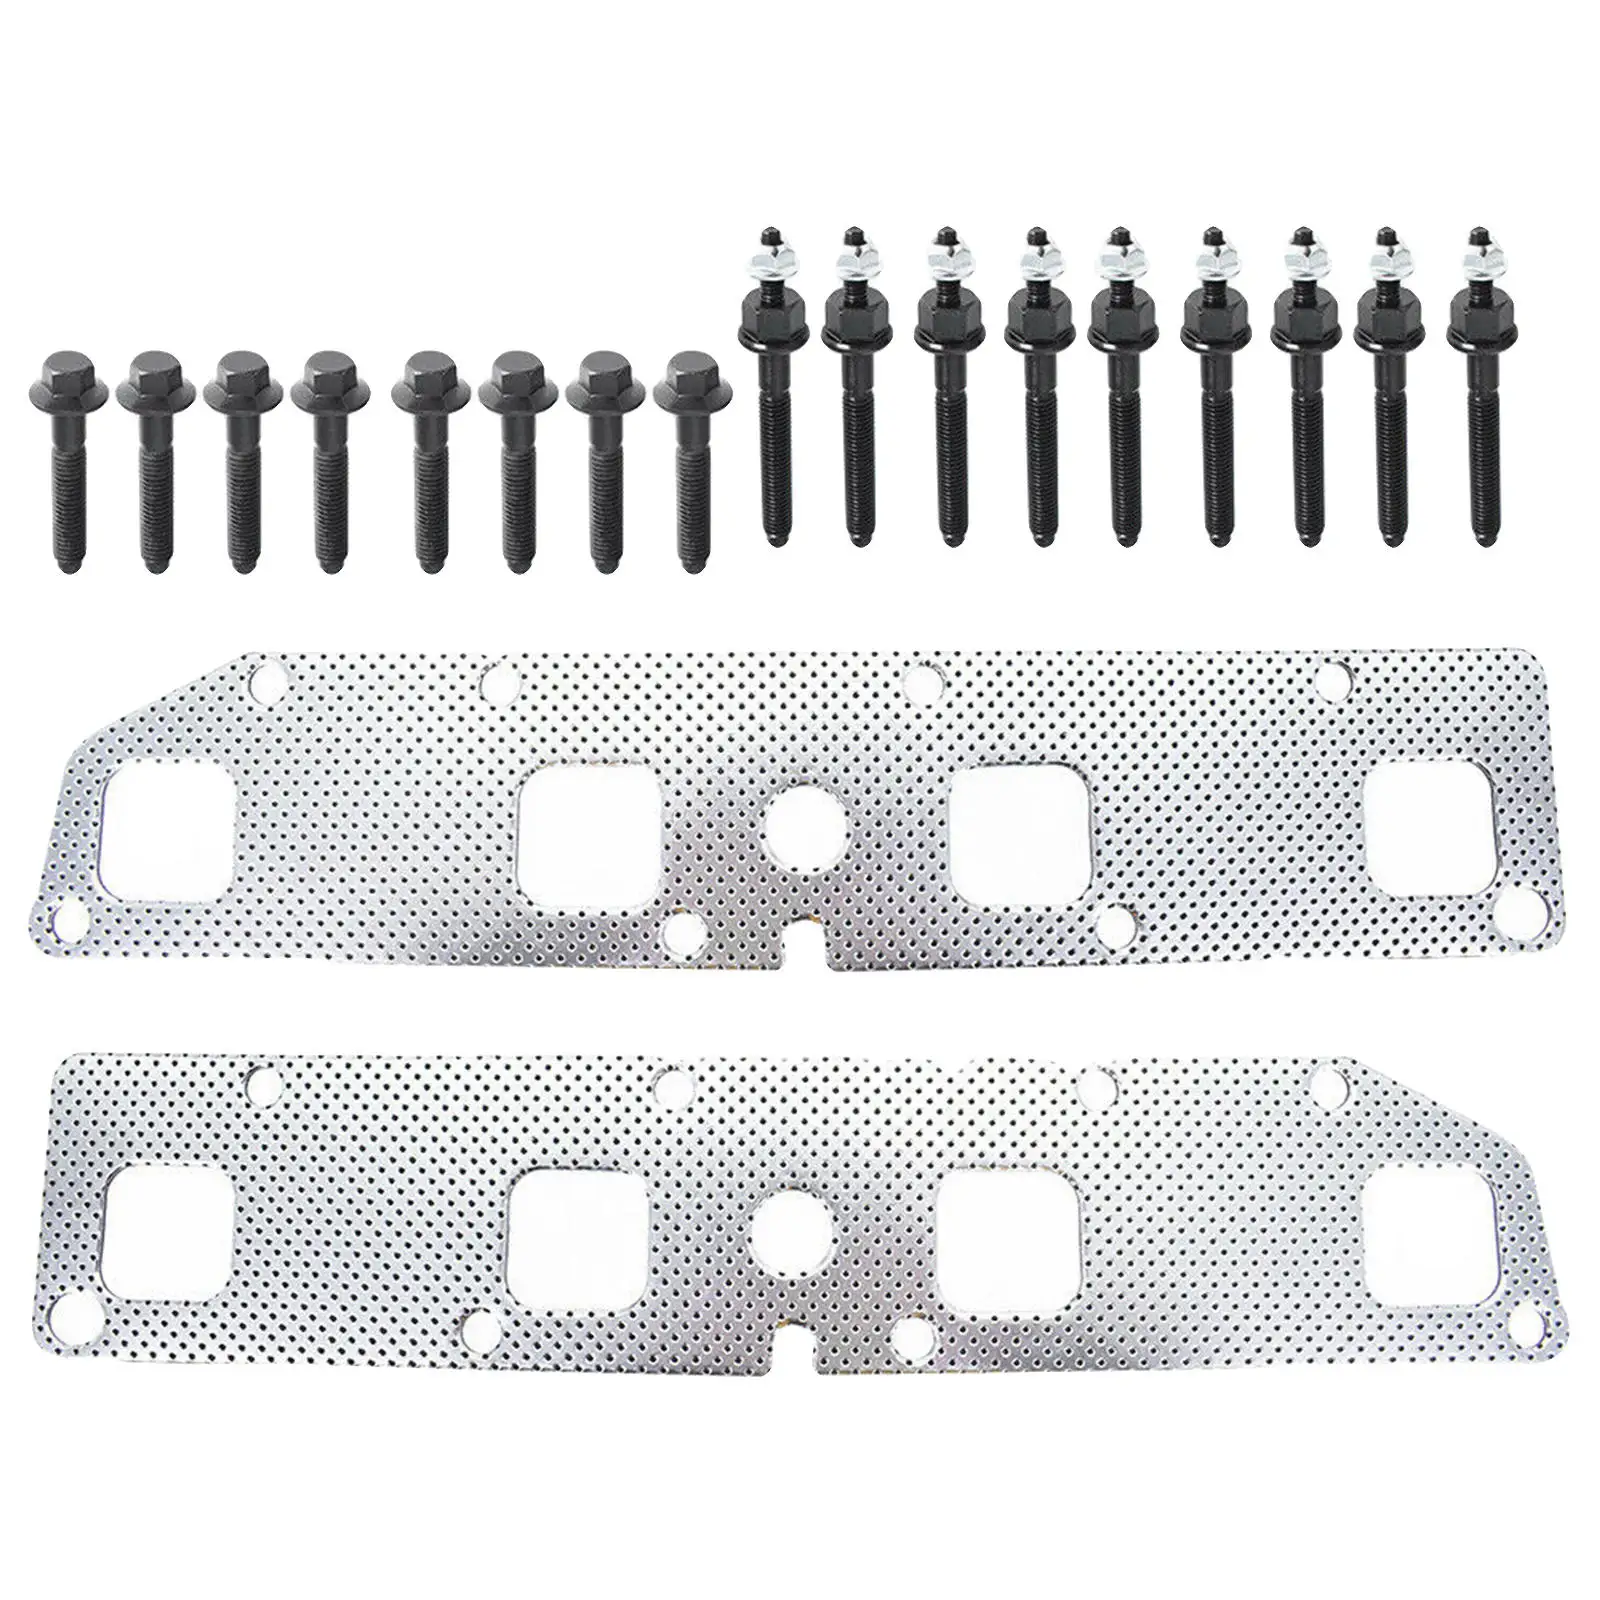 Exhaust Manifold Gaskets Set with Bolts Studs Nuts 6507746AA 53032098AD 6510140AA 53013944AA Hardware Kit Fit for Charger